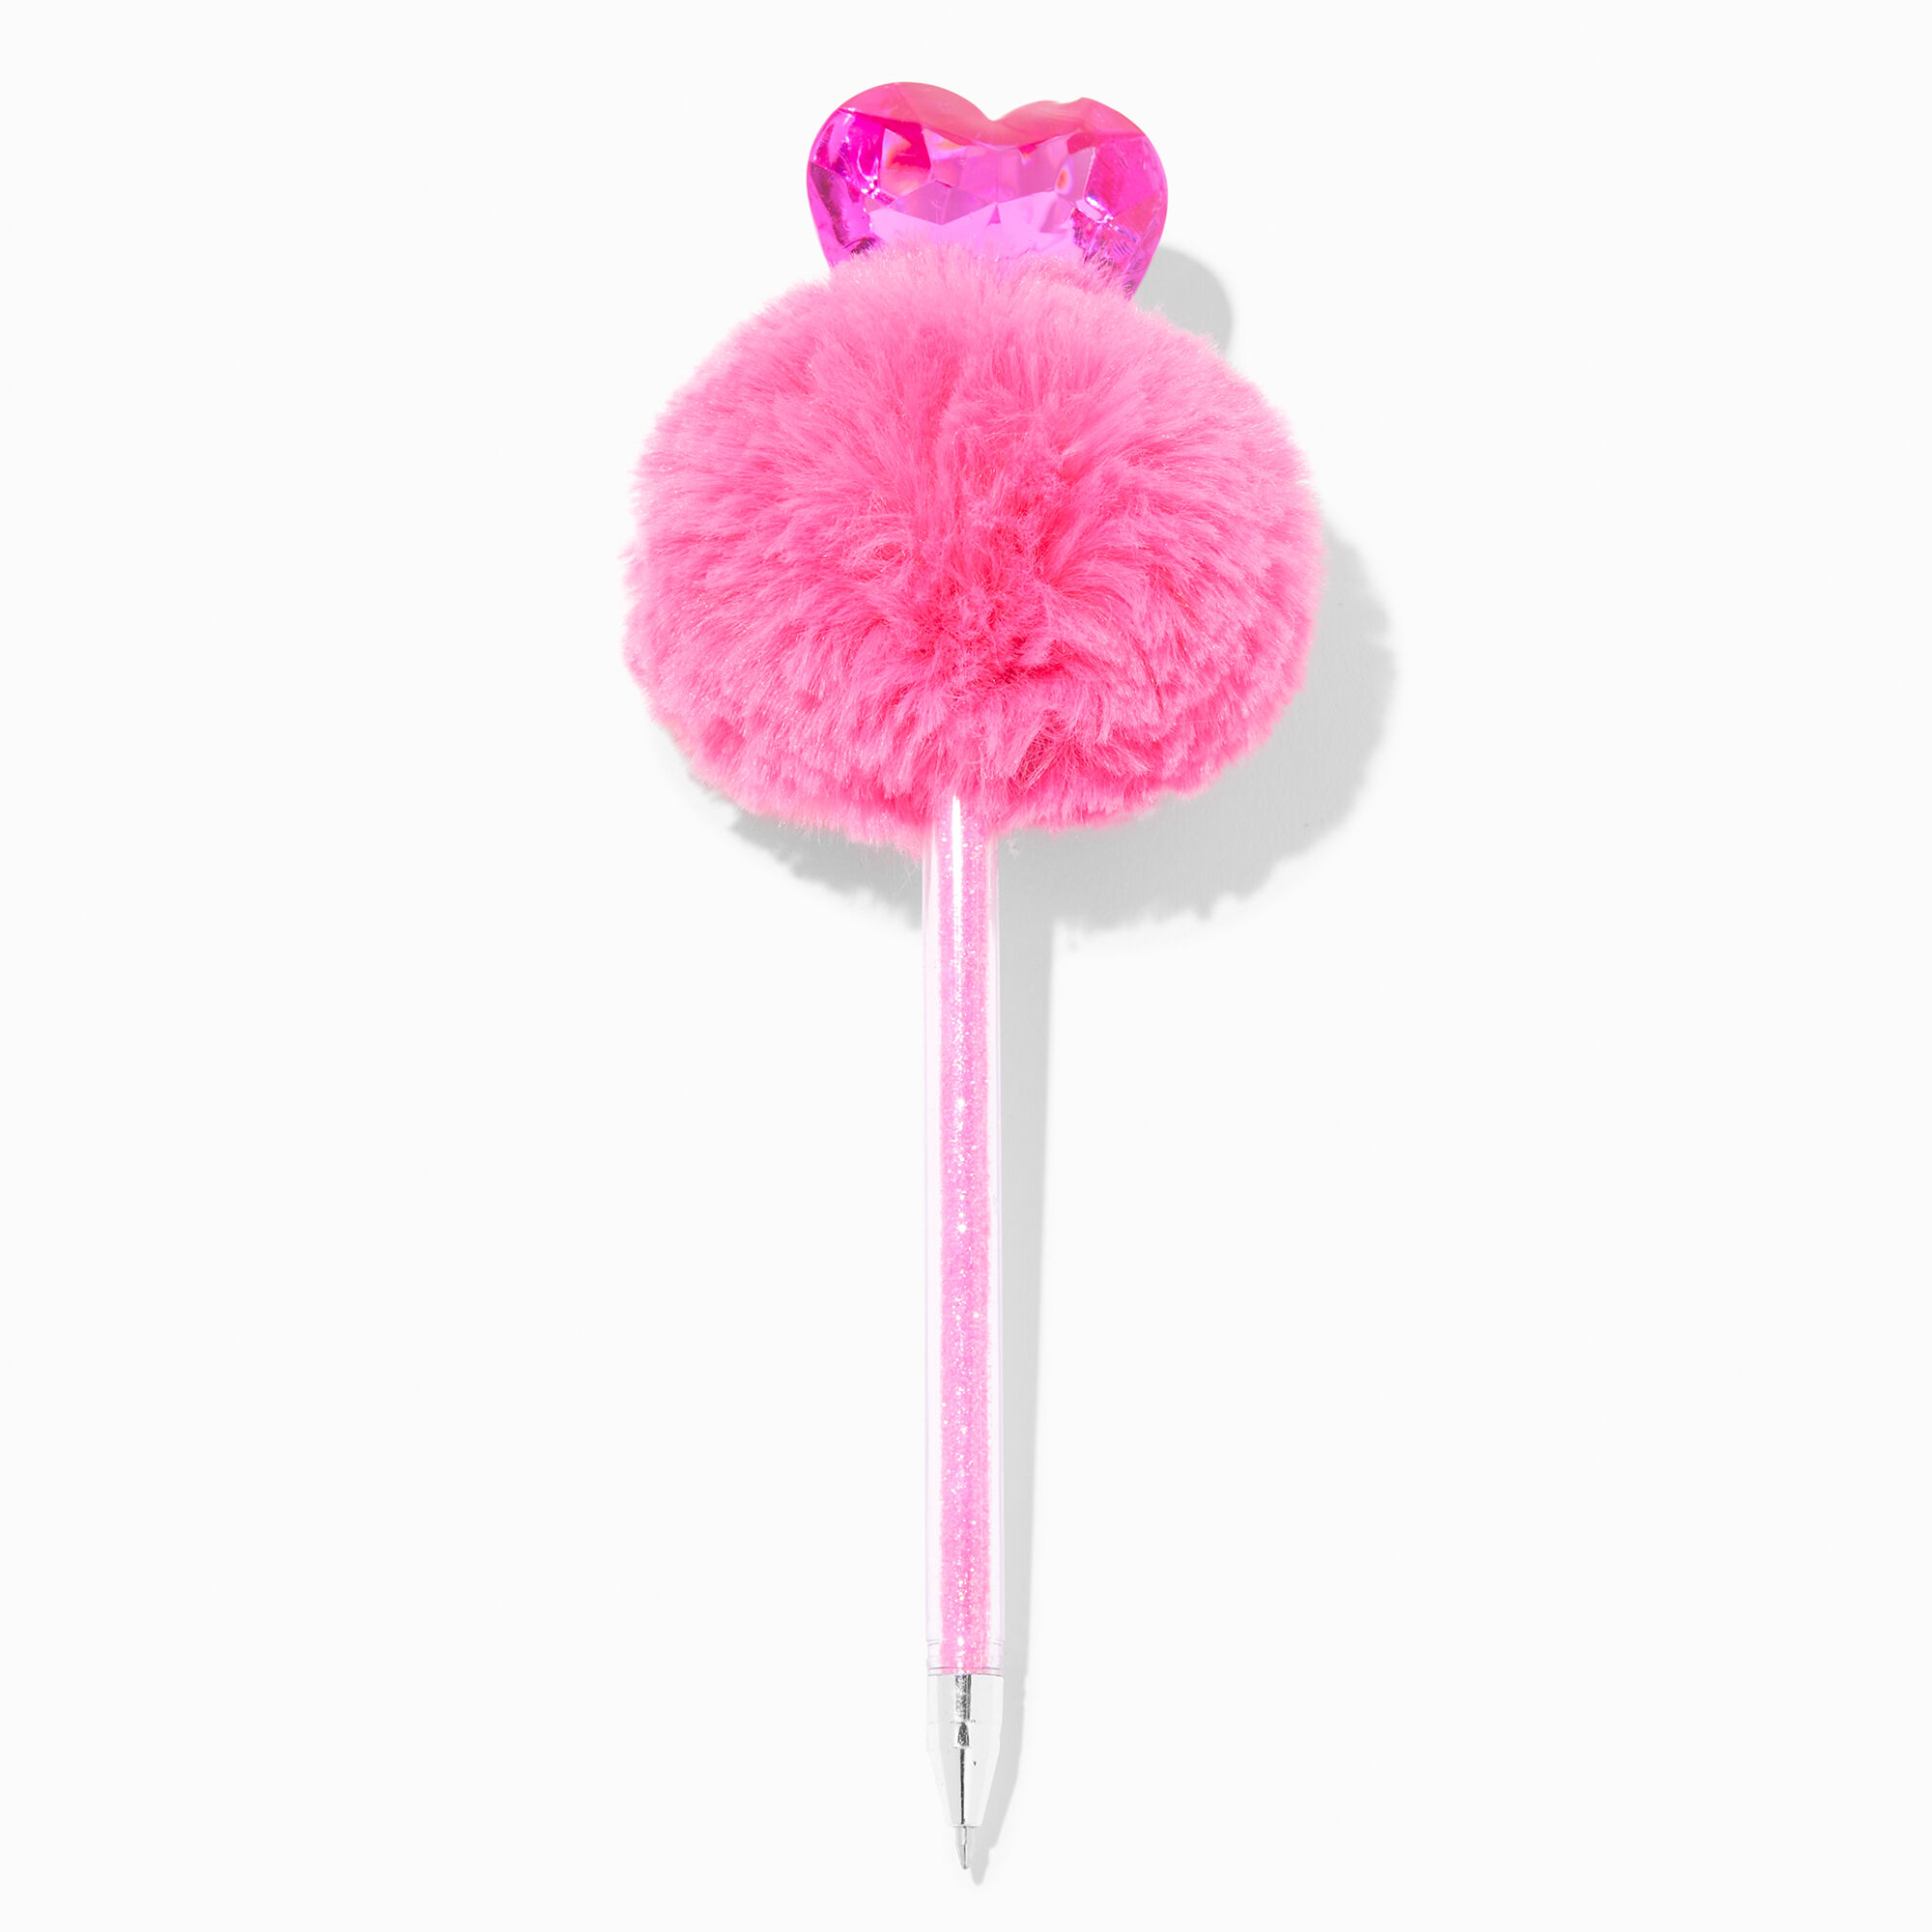 View Claires Pom Heart Pen Pink information